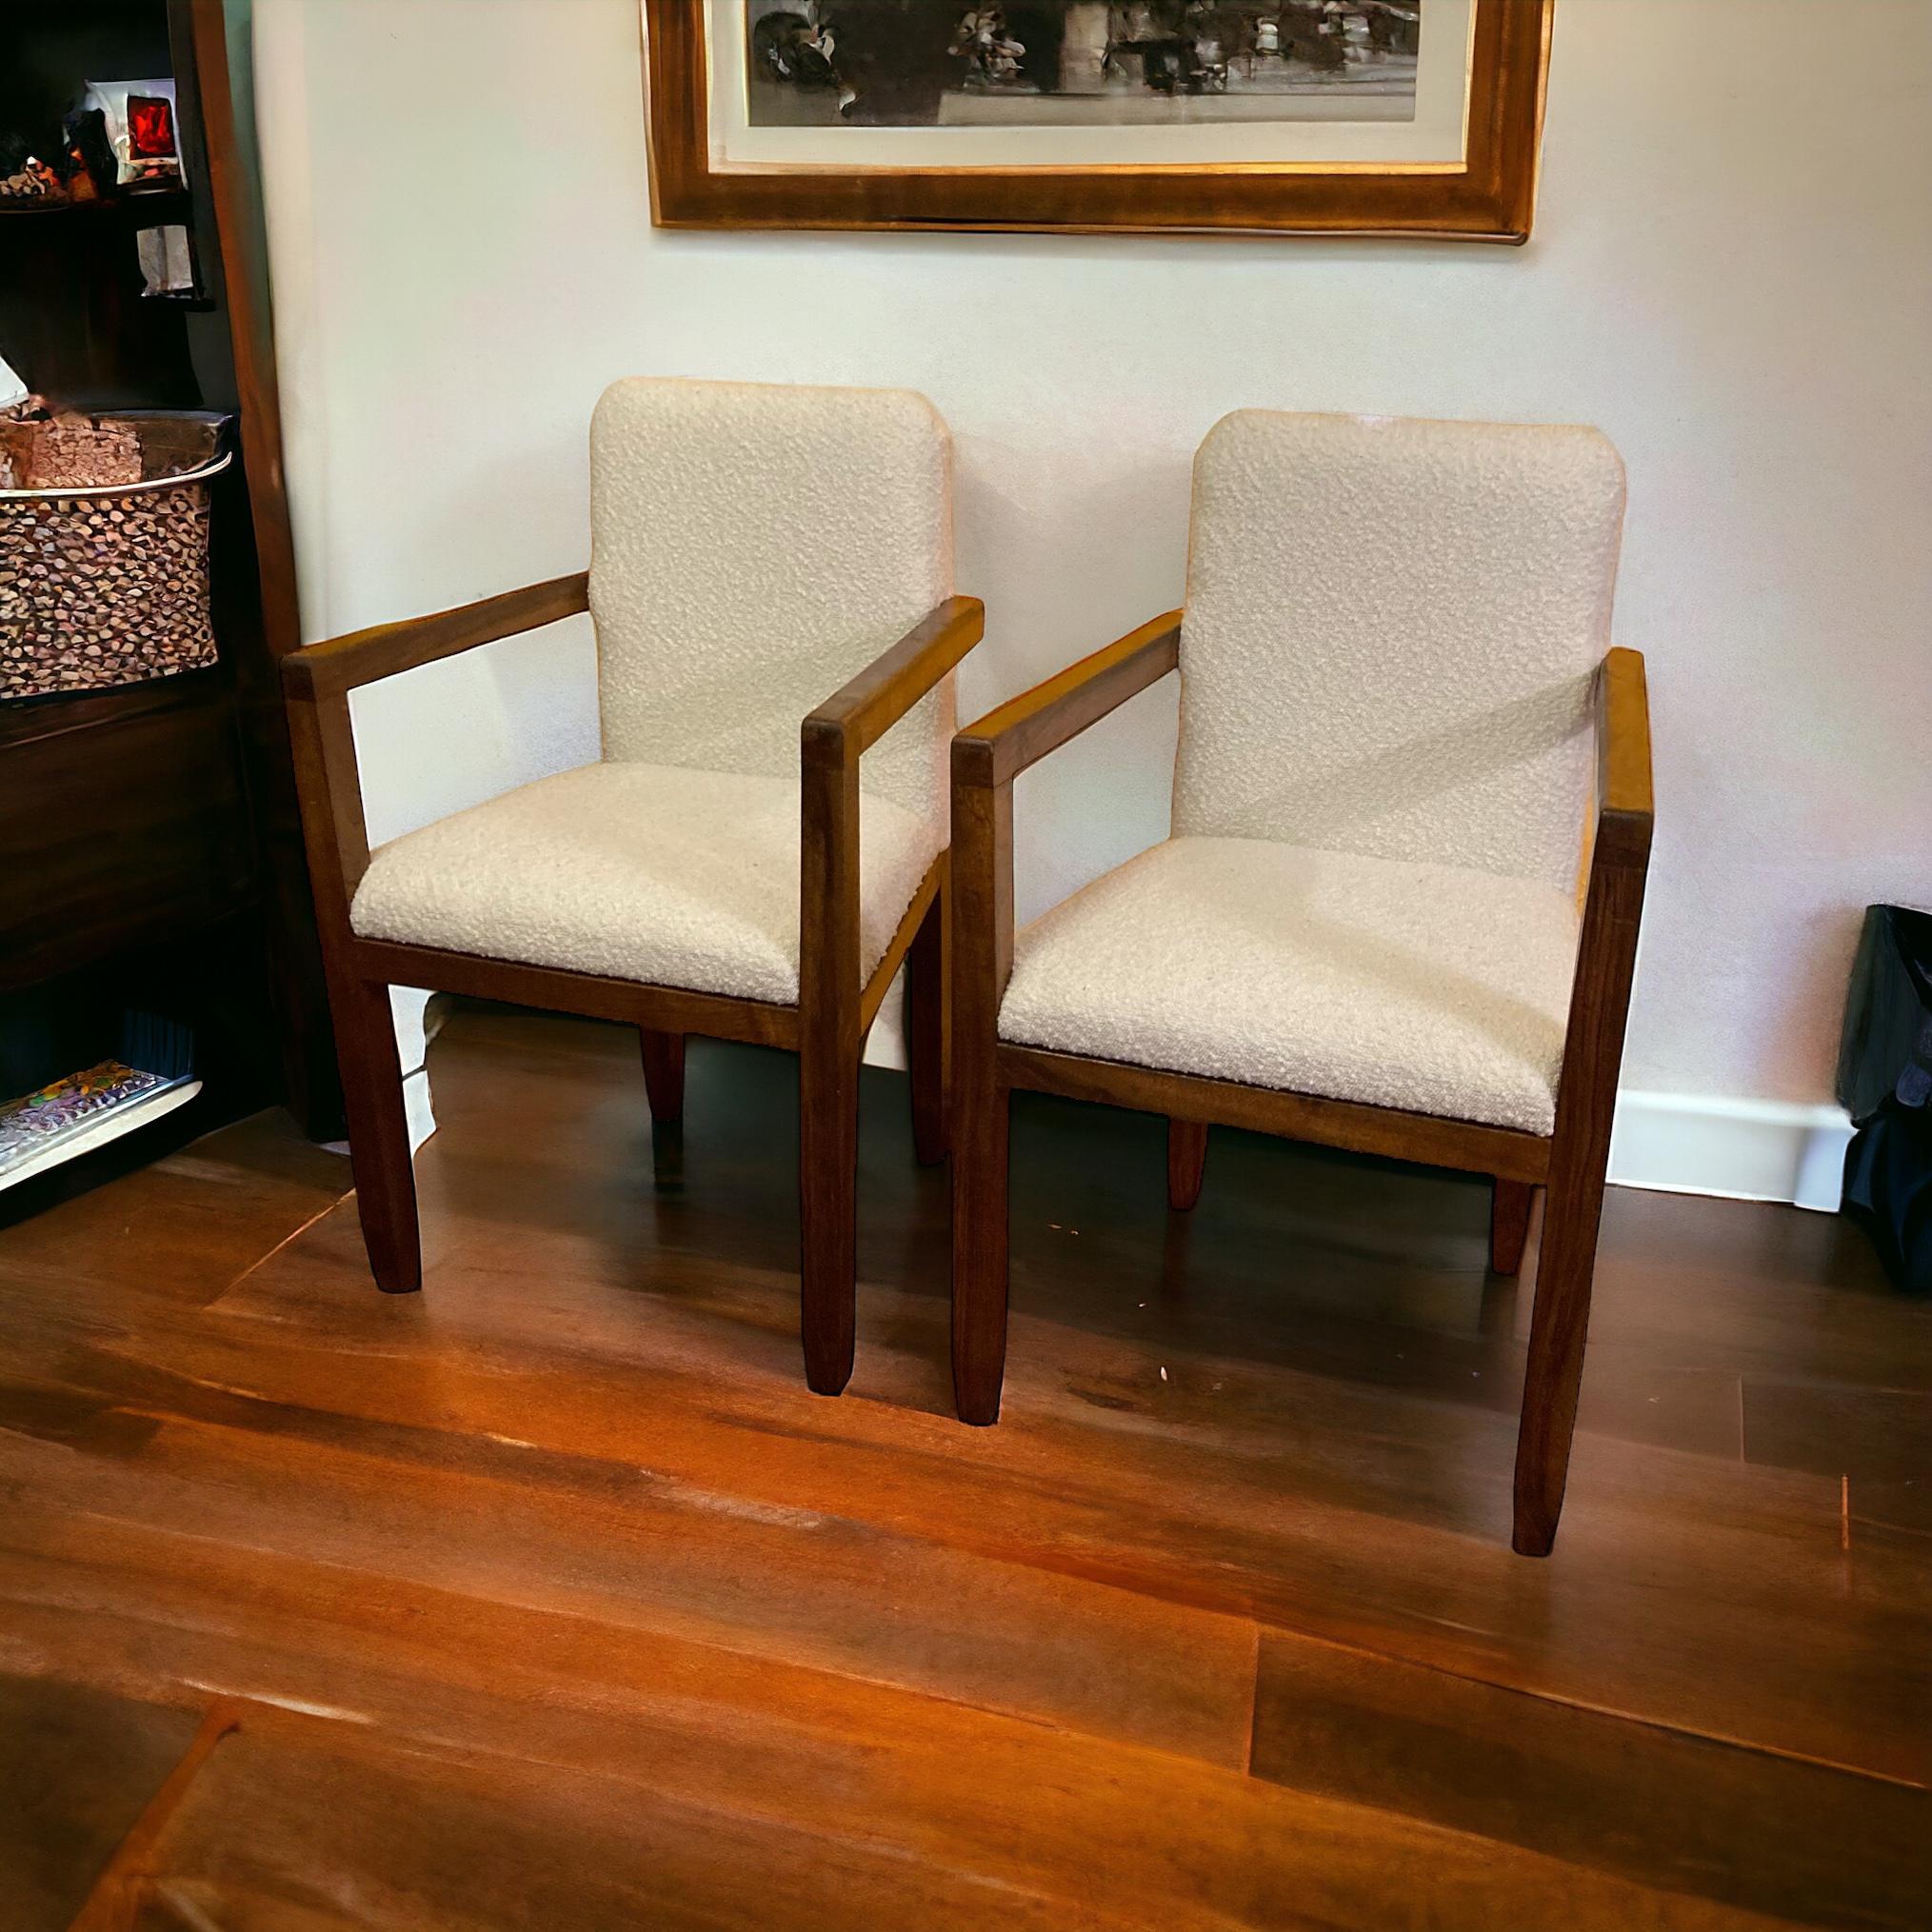 A Pair of Art Deco Mahogany framed Armchairs, White Boucle Upholstery 1920's For Sale 10